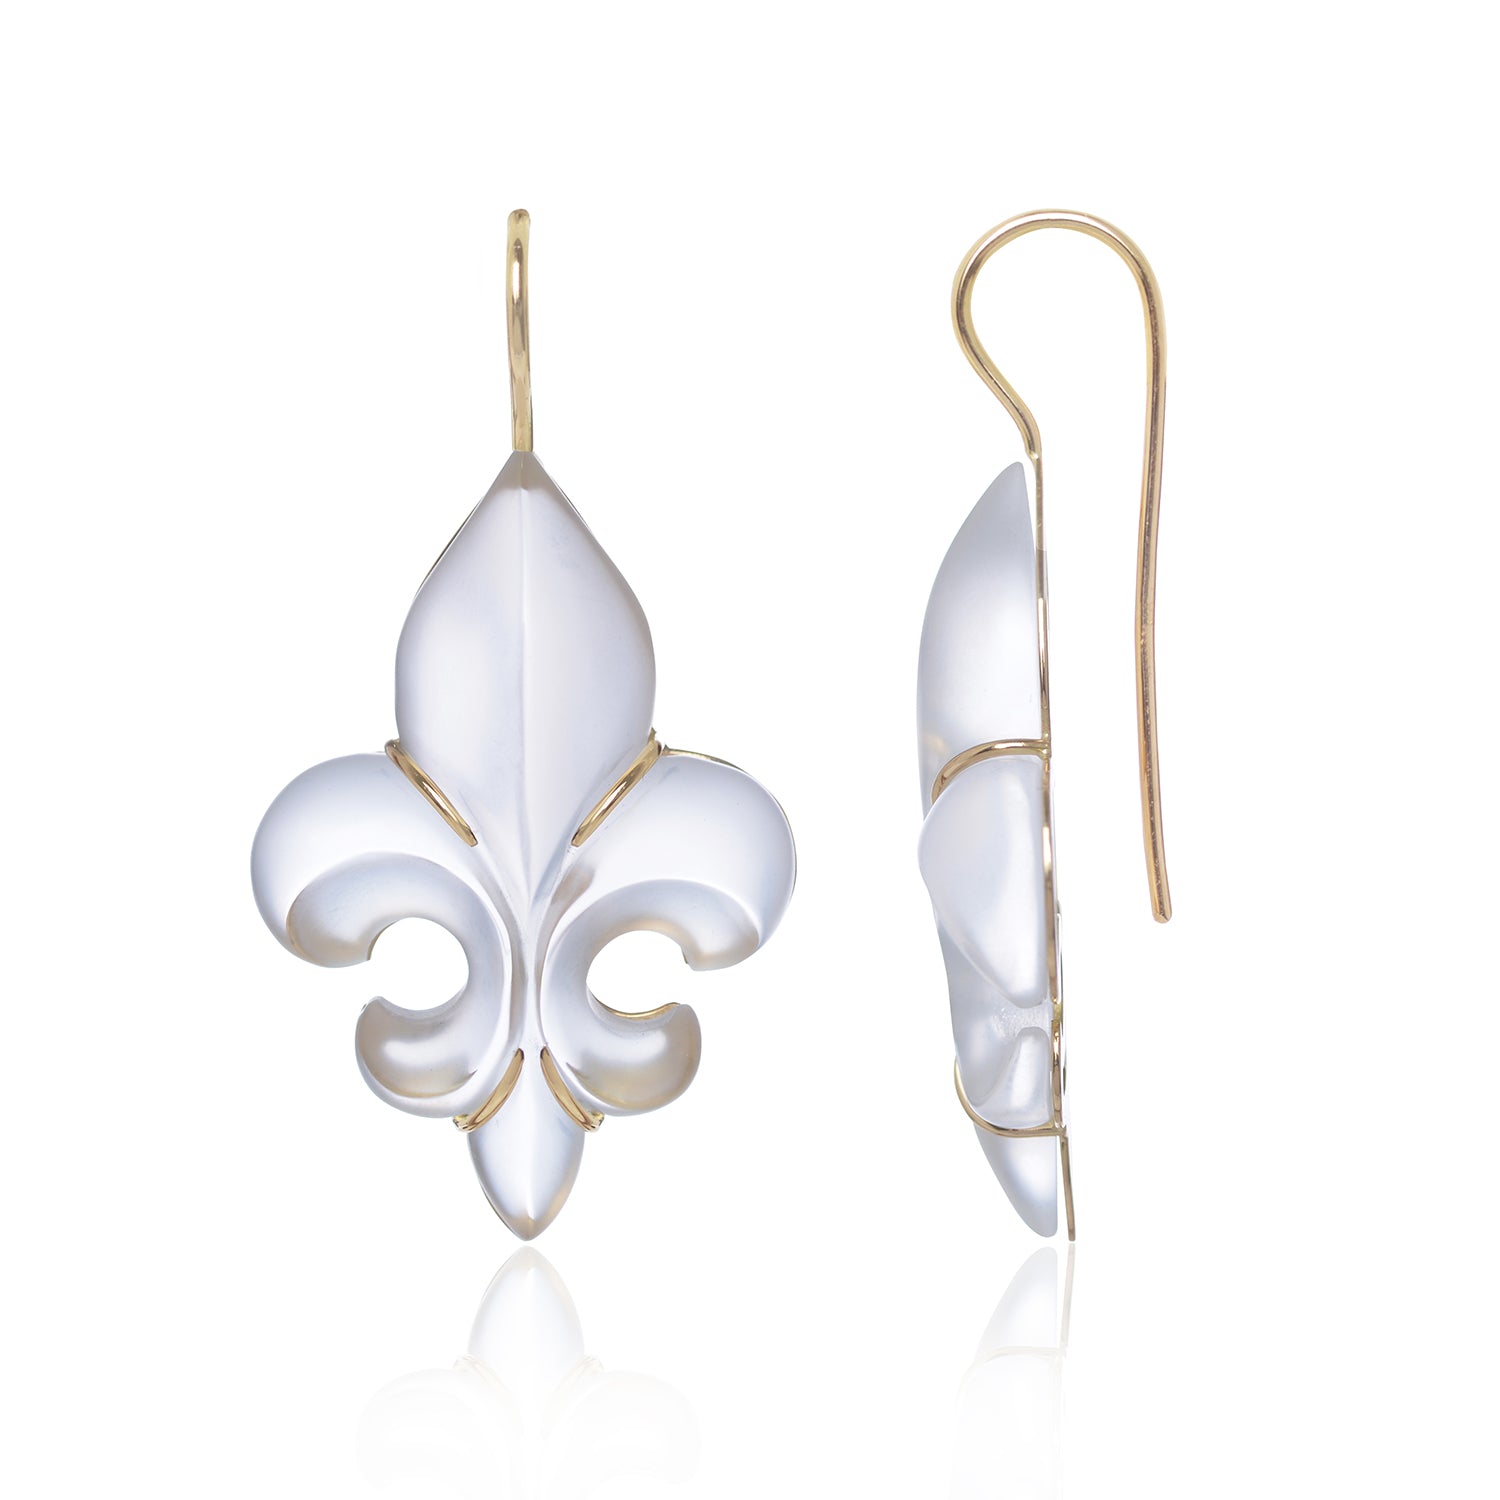 Frosted Fleur des Lys Earrings in 18ct yellow gold side view by McFarlane Fine Jewellery